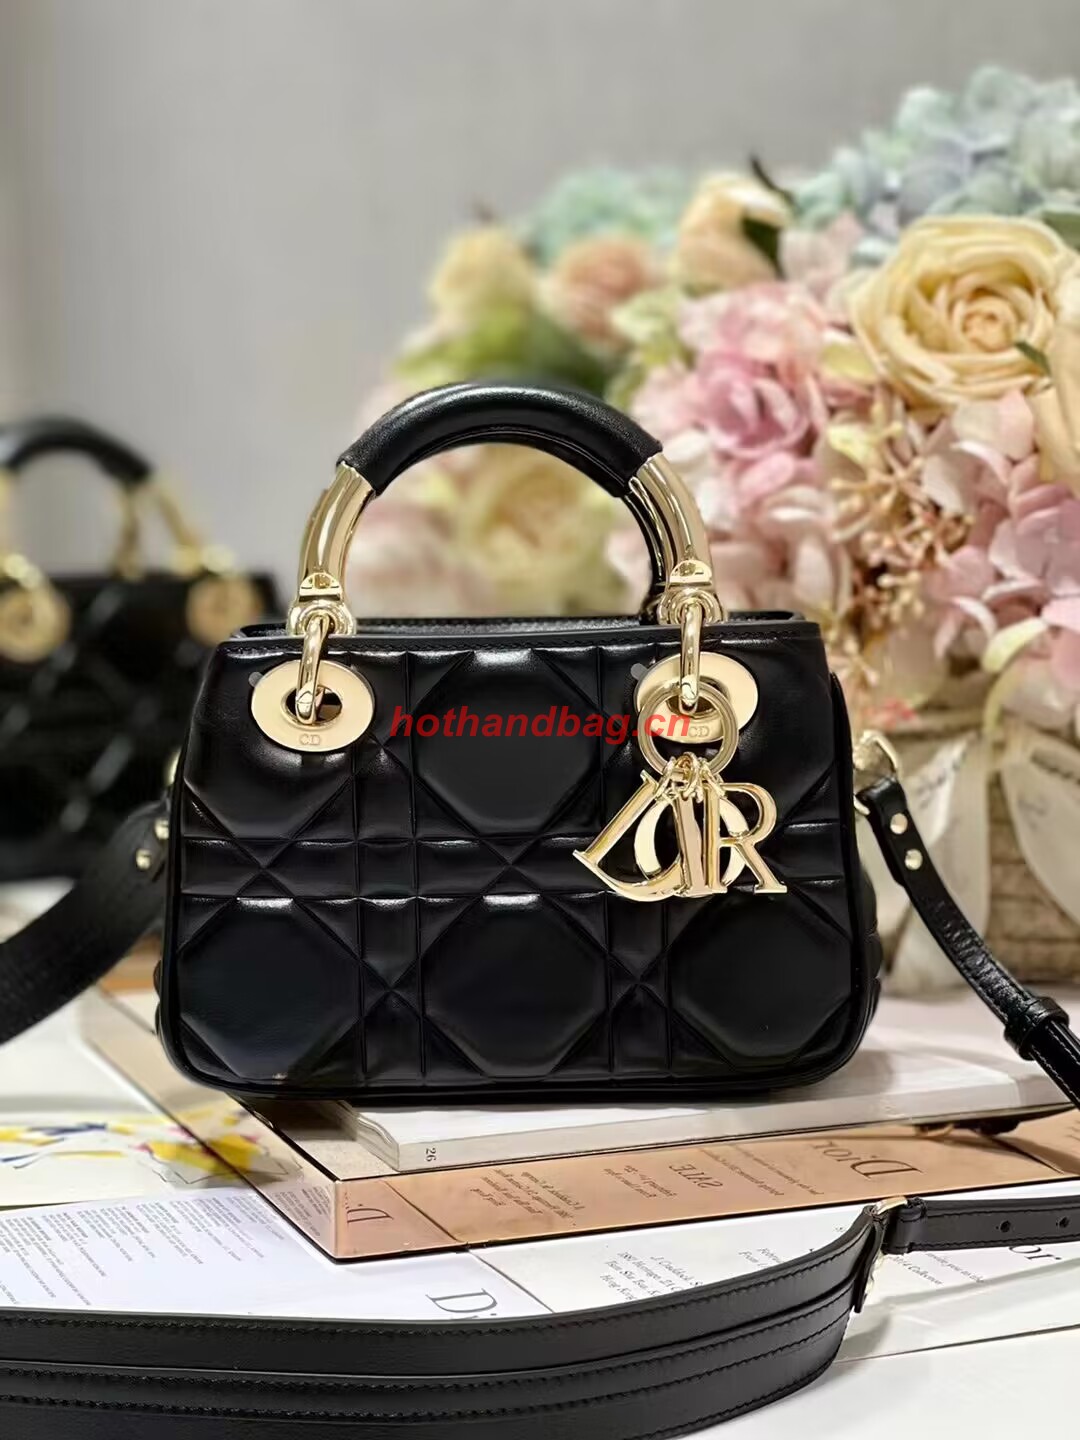 LADY DIOR TOP HANDLE SMALL BAG Cannage Lambskin C0620 black